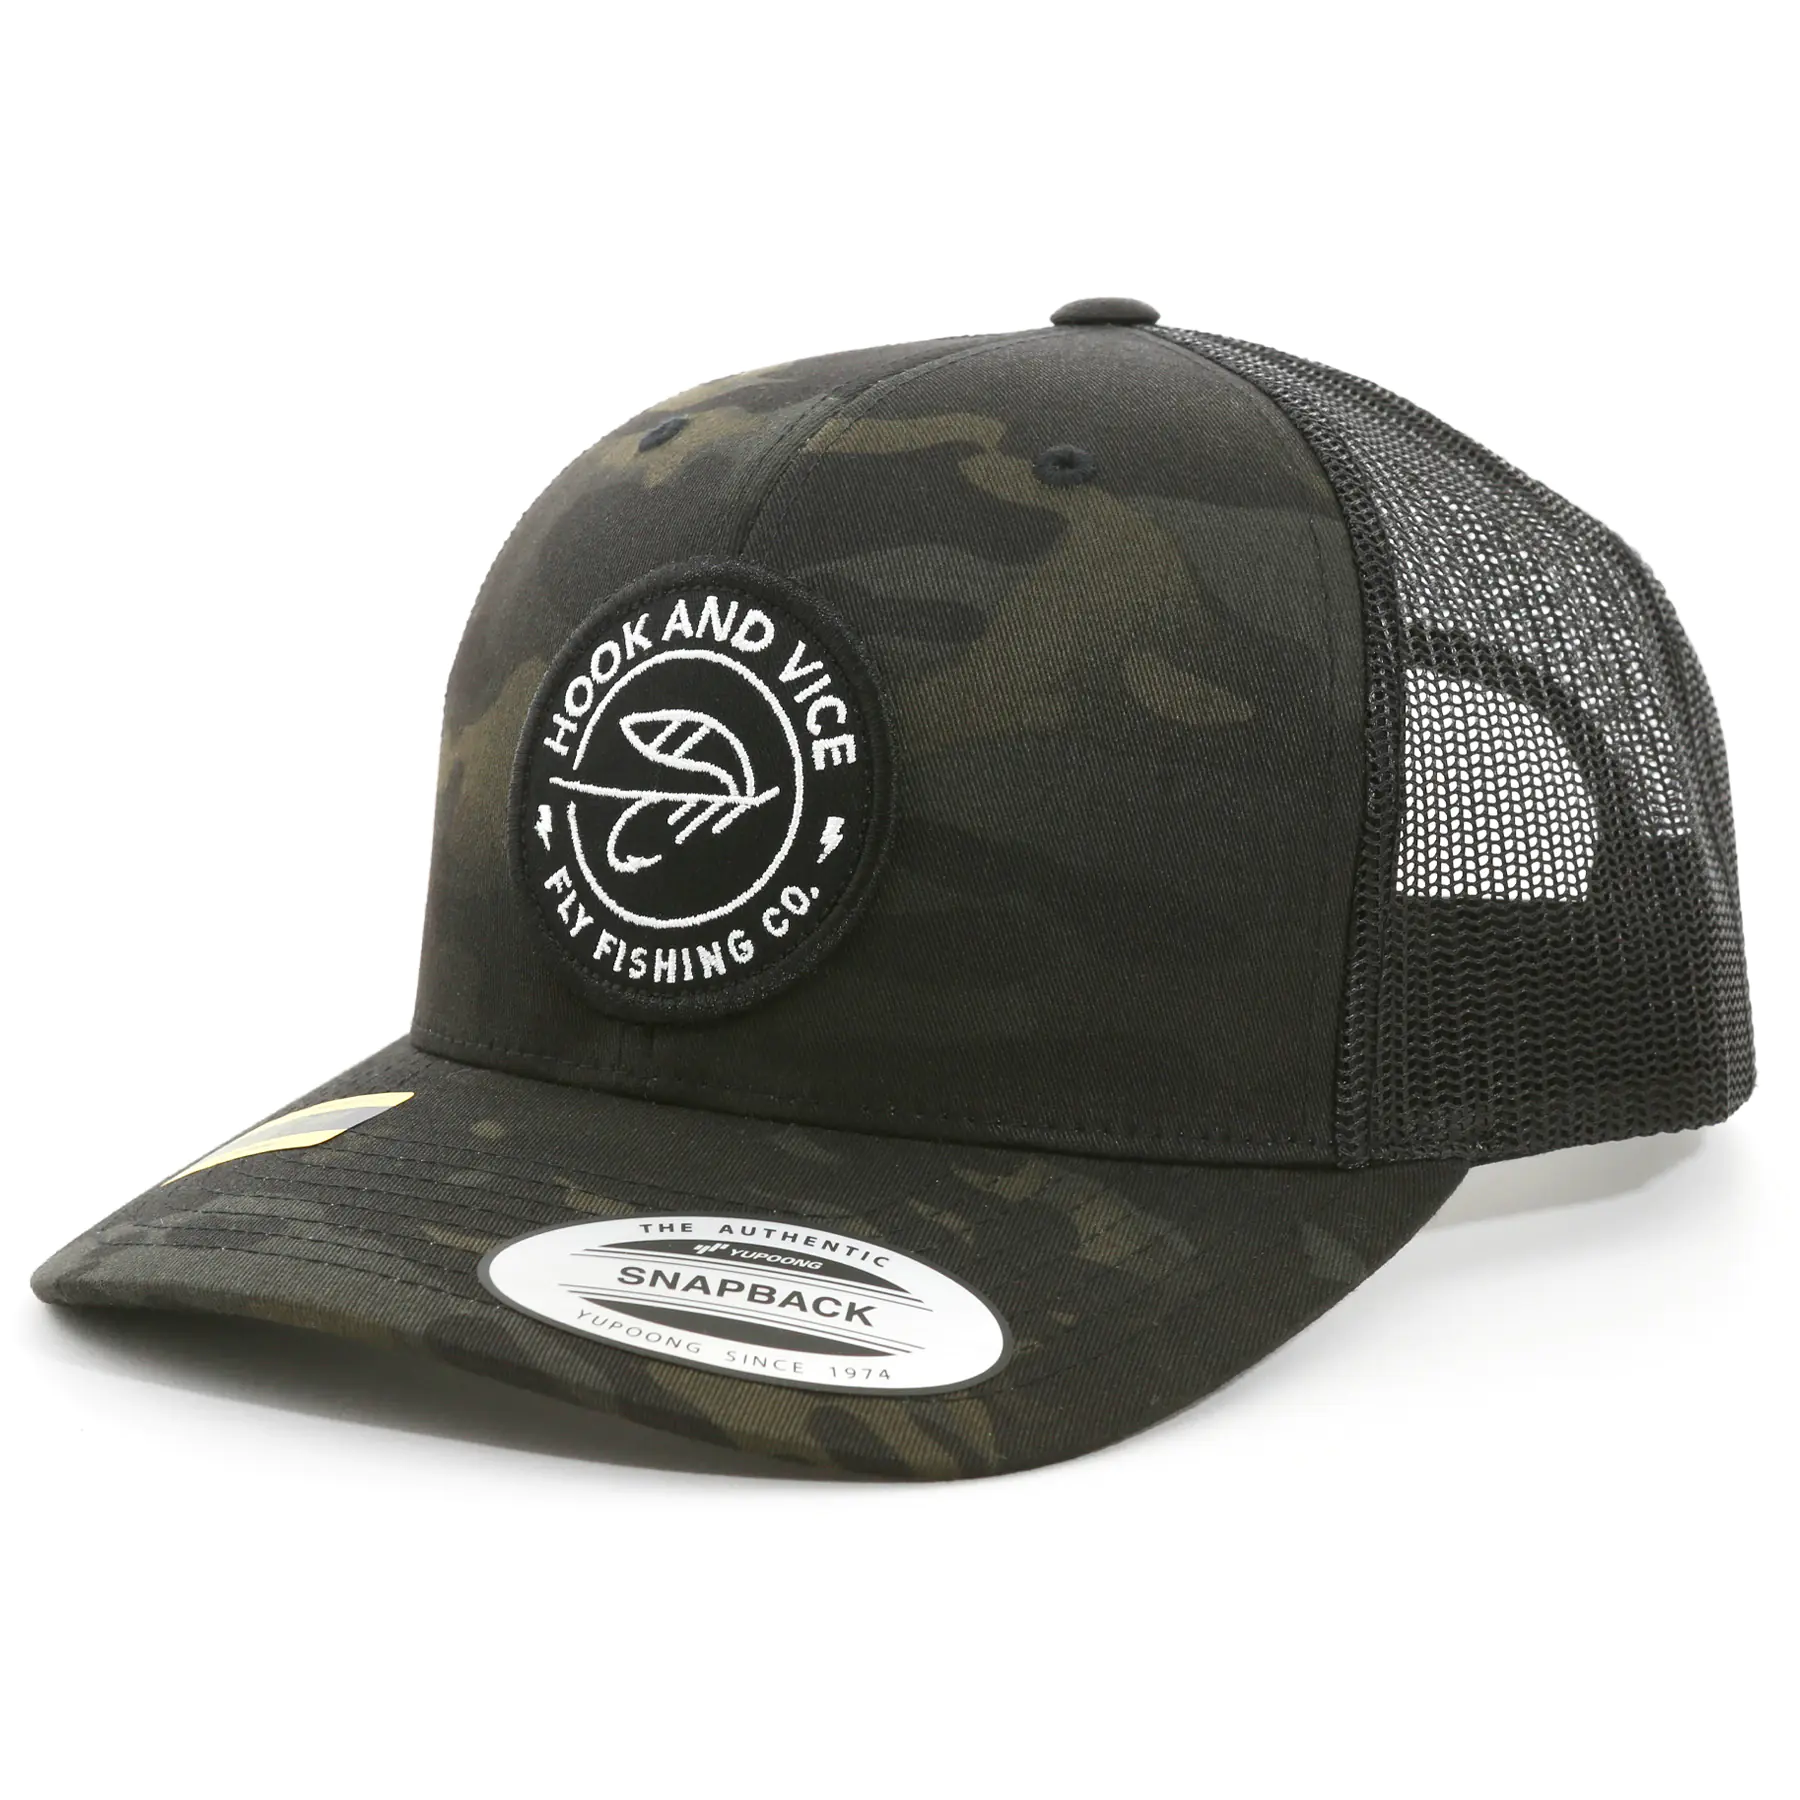 Hook and Vice Pro Model Hat - Camo Classic